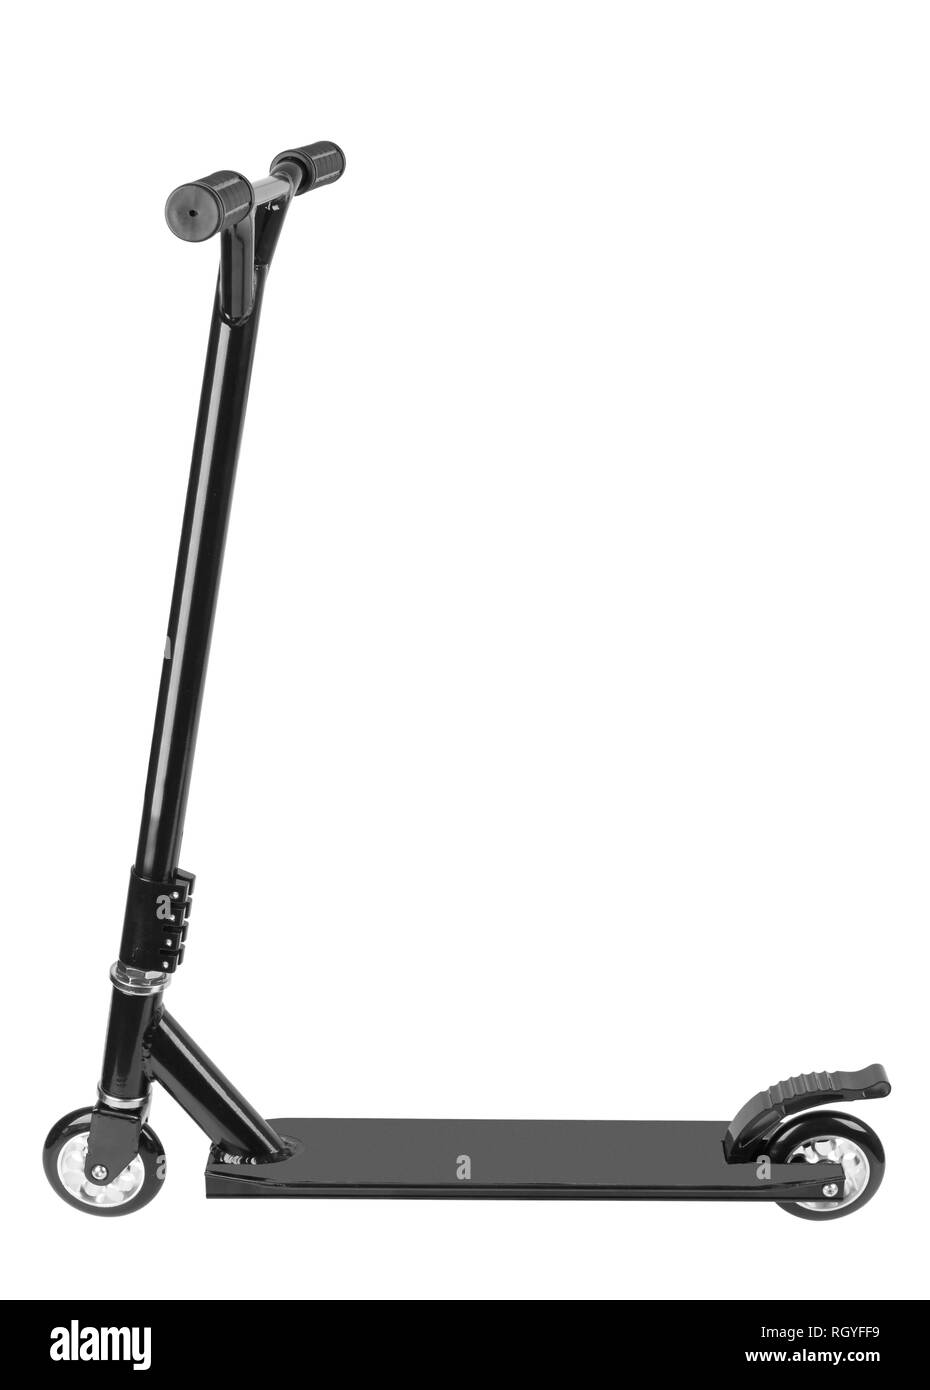 metal scooter isolated on a white background Stock Photo